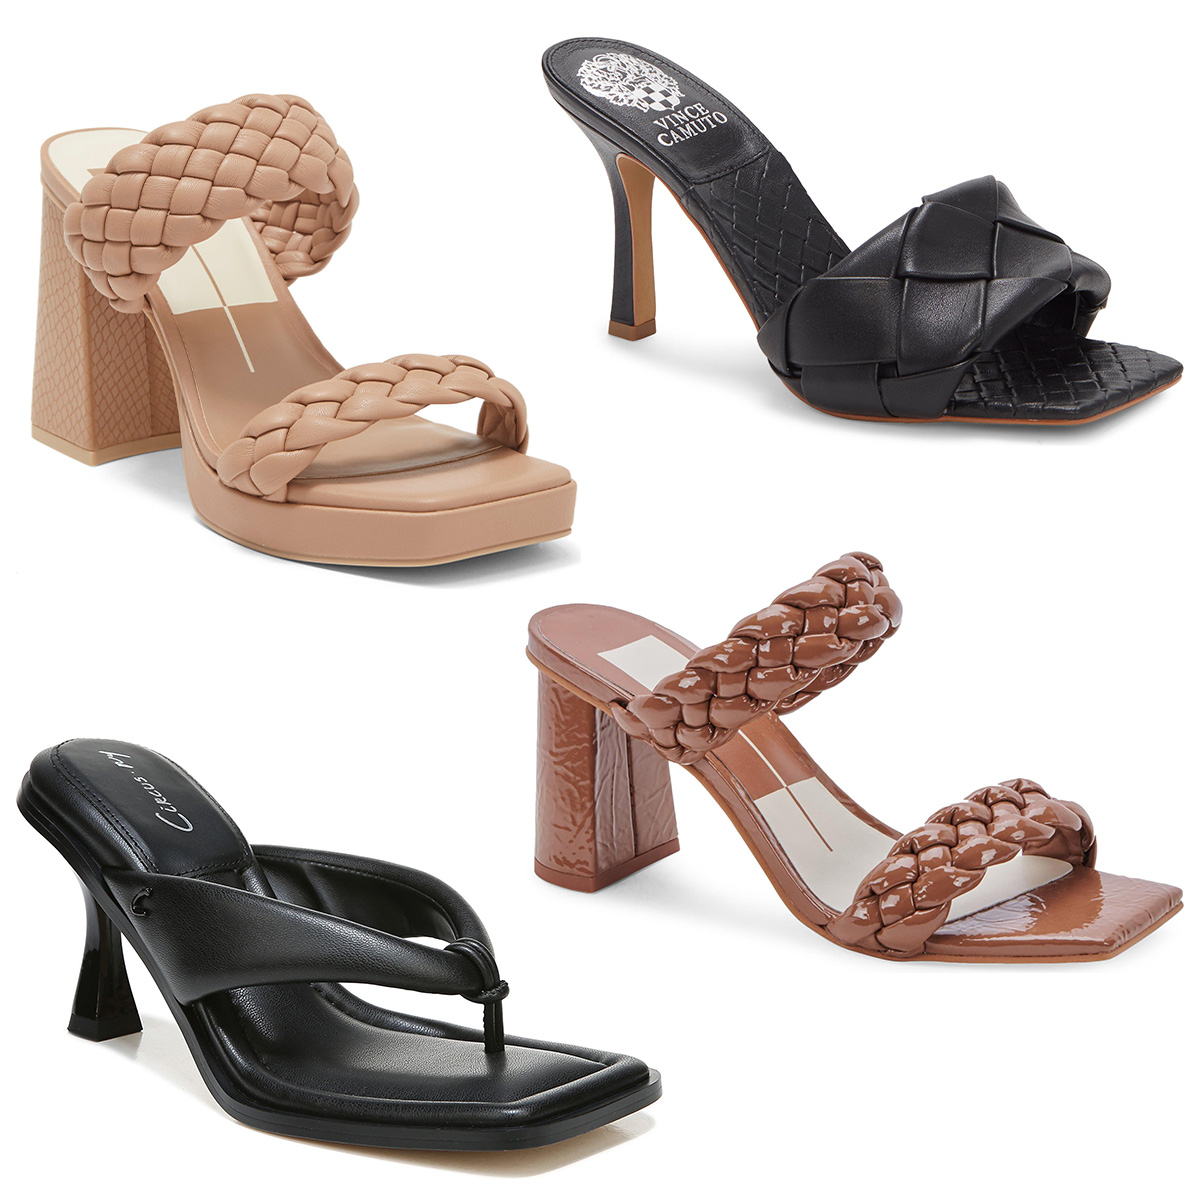 Nordstrom Rack Has Comfortable Sandals on Sale for Under $50